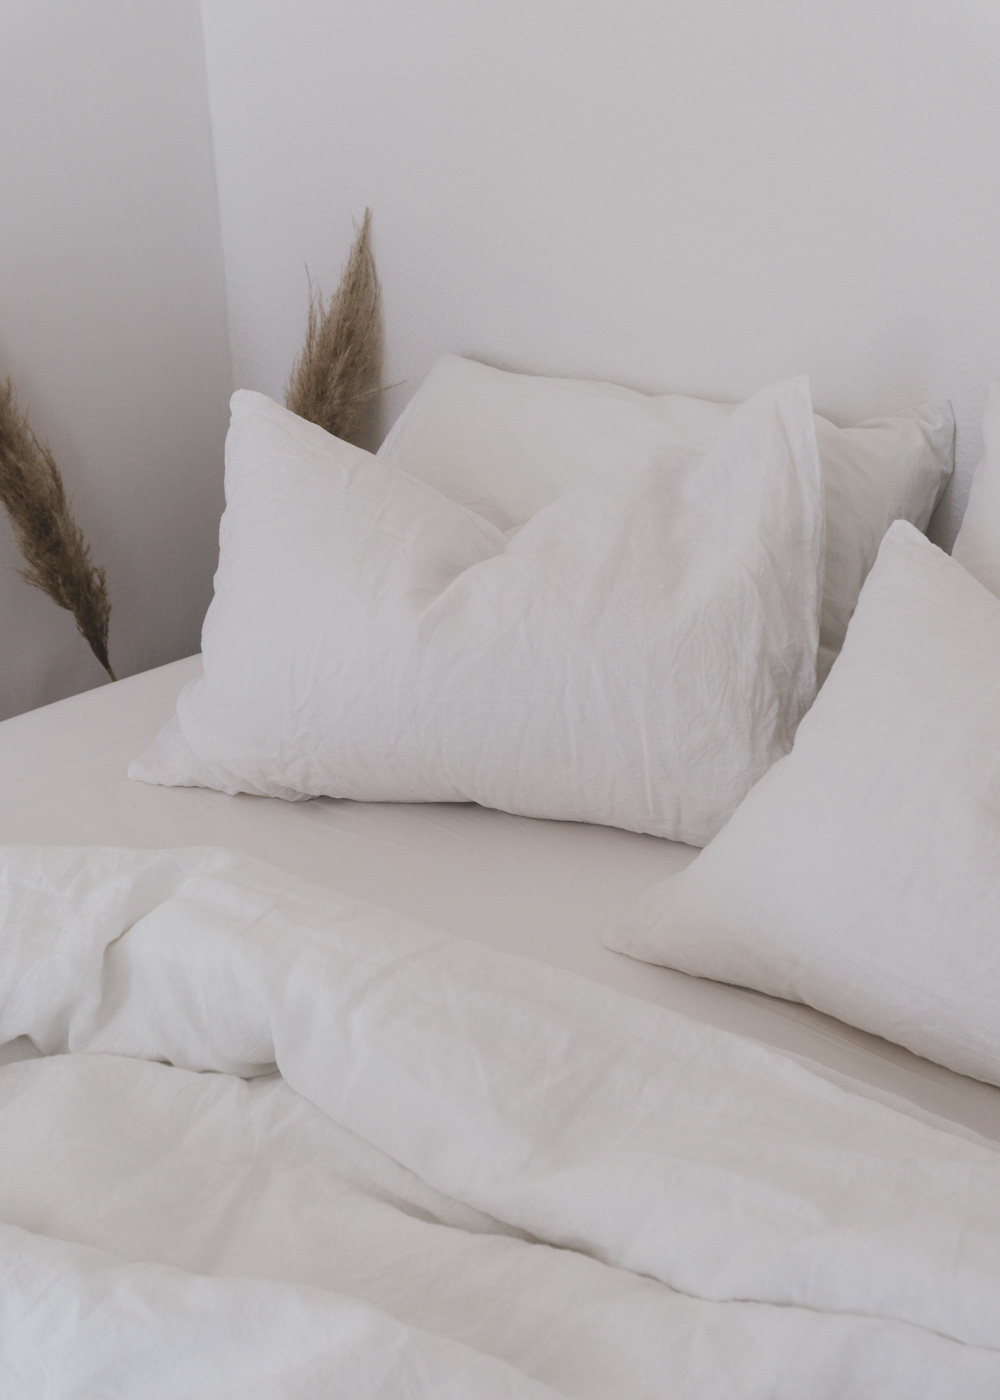 Bedfolk Linen Bedding | Neutral Aesthetic, White Interior, Calming Eco-Style, Dreamy Bed, Luxury Bedroom, Natural Home - RG Daily